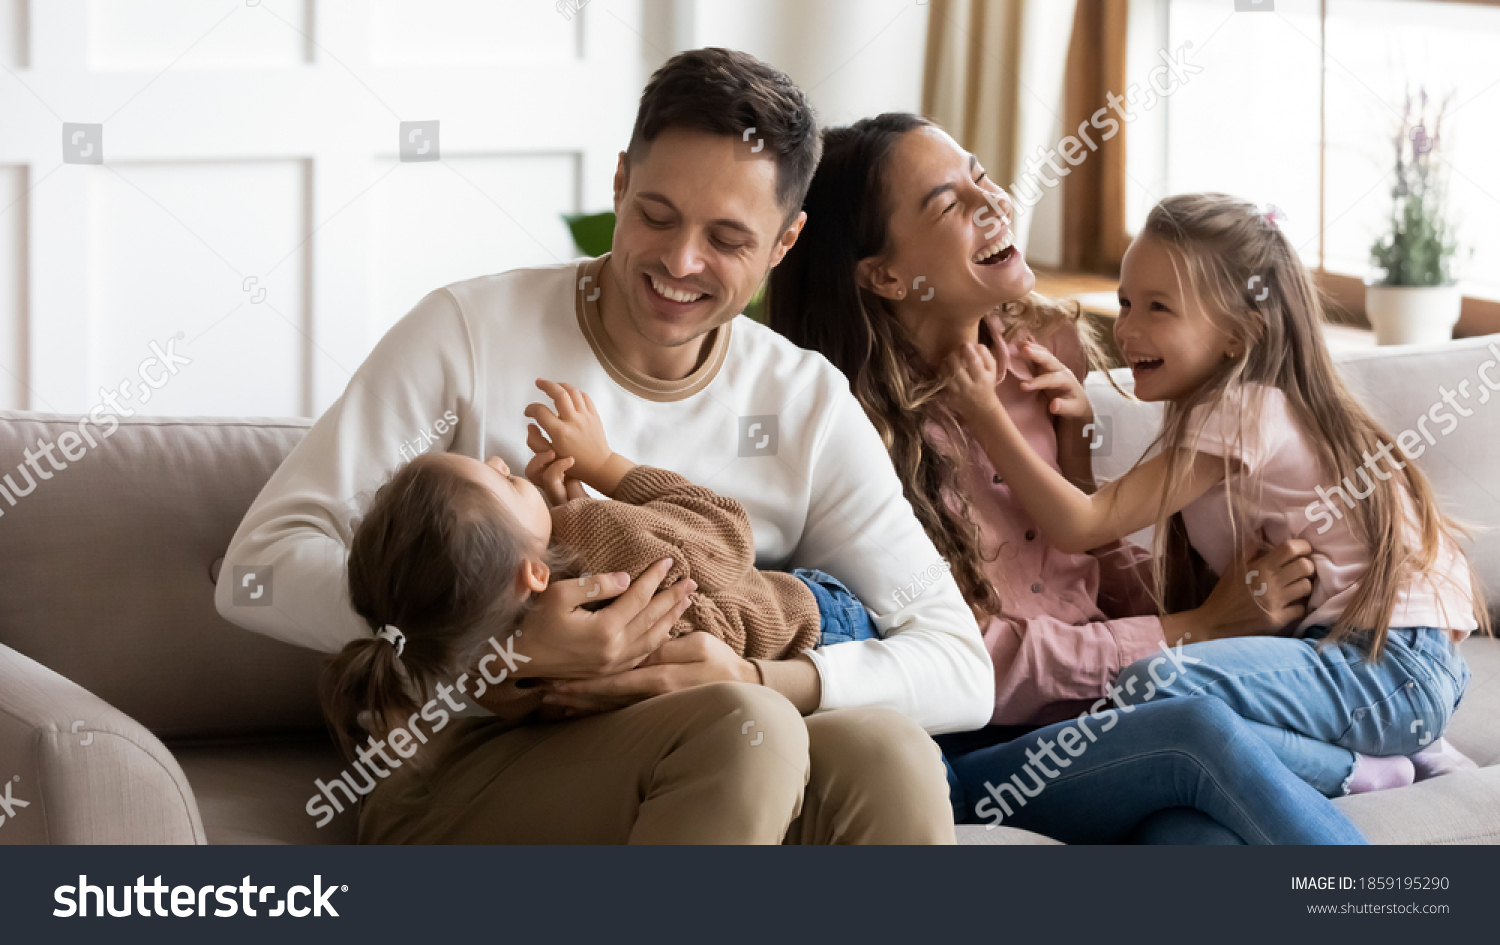 Funny parents play with two daughters resting on couch in light cozy living room. Family enjoy playtime together at home, tickling each other laughing feels happy. Having fun at home with kids concept #1859195290